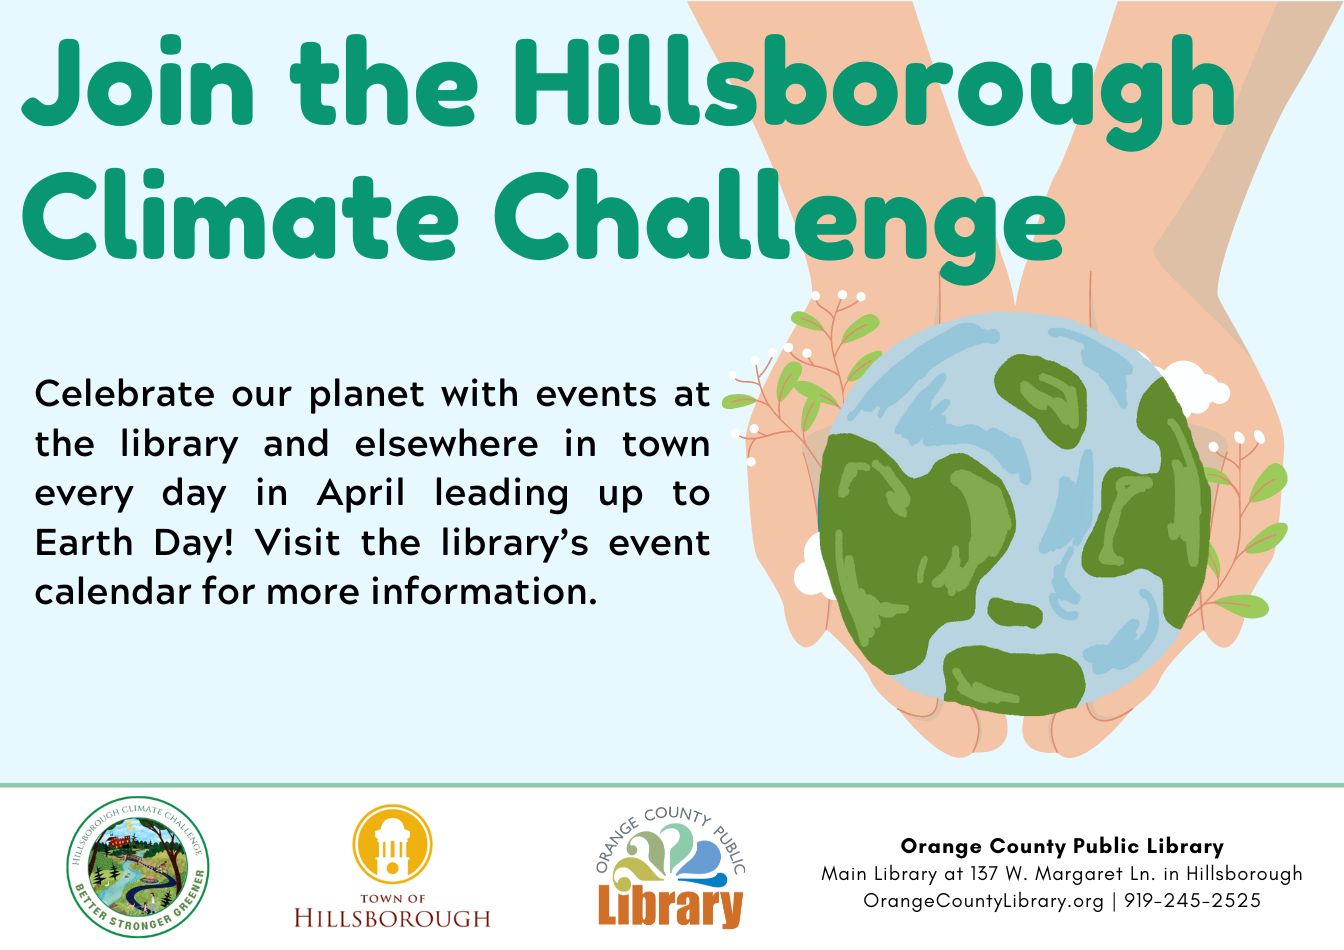 Earth Friendly Burial Options - Hillsborough Climate Challenge